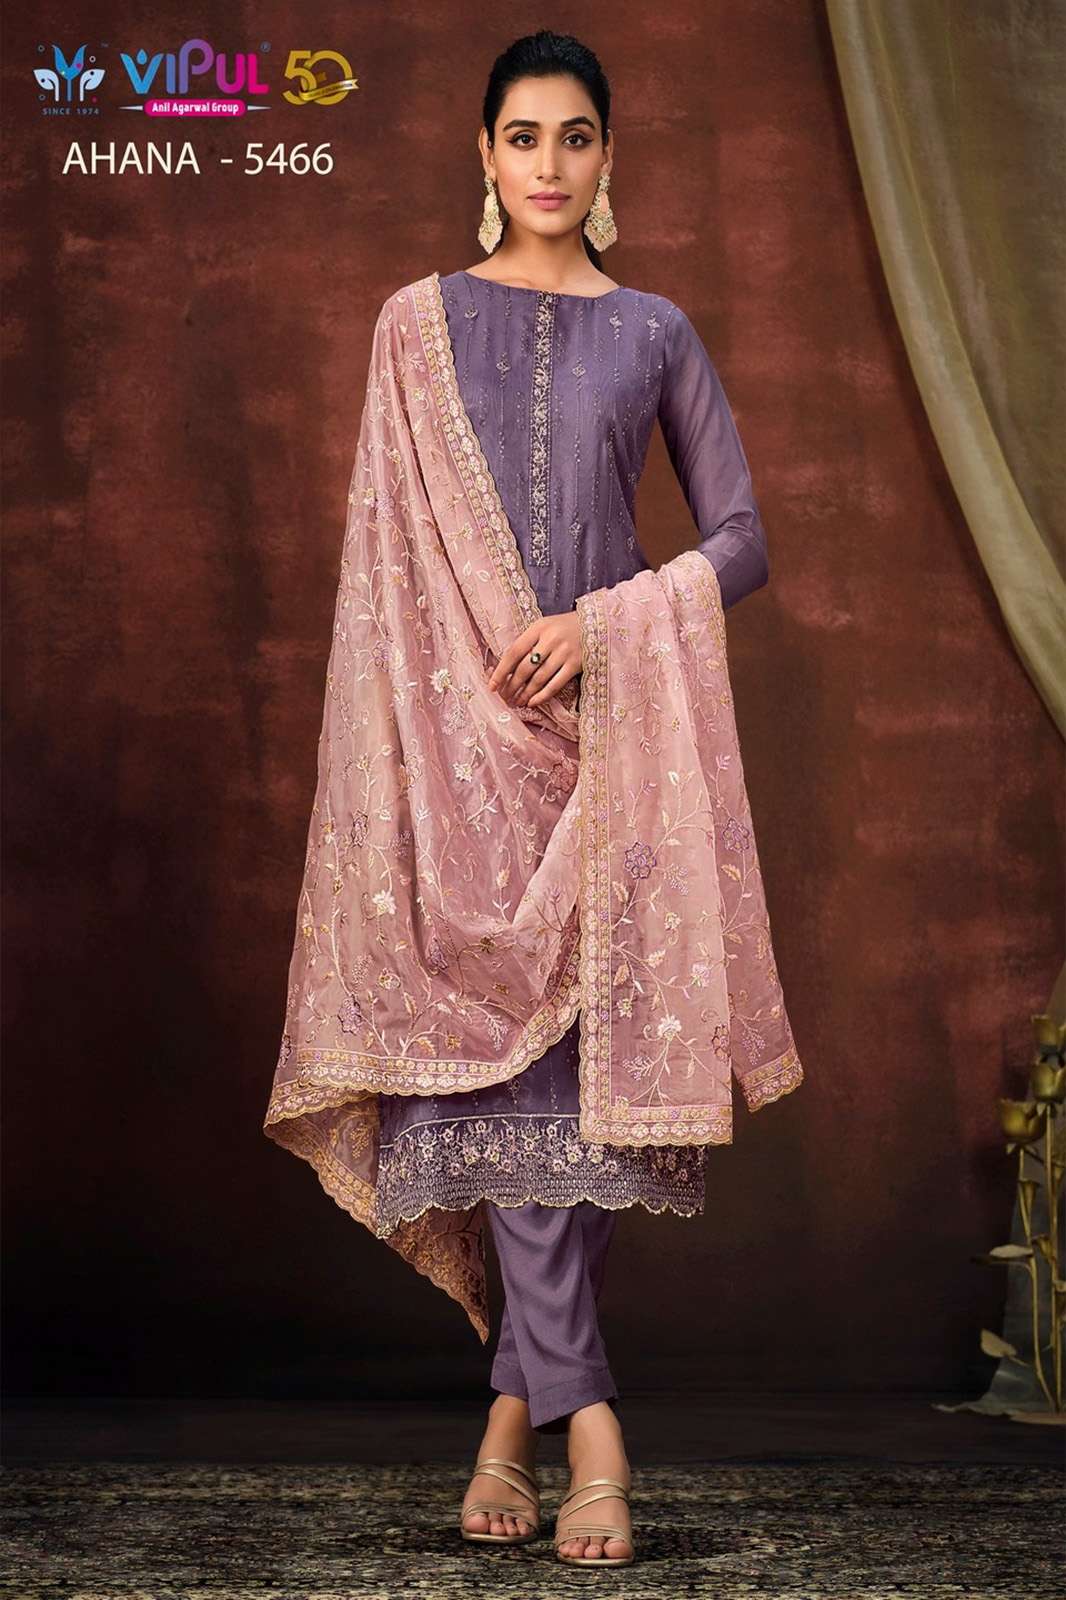 VIPUL AHANA simmar organza with embroidery suit in multi colors 